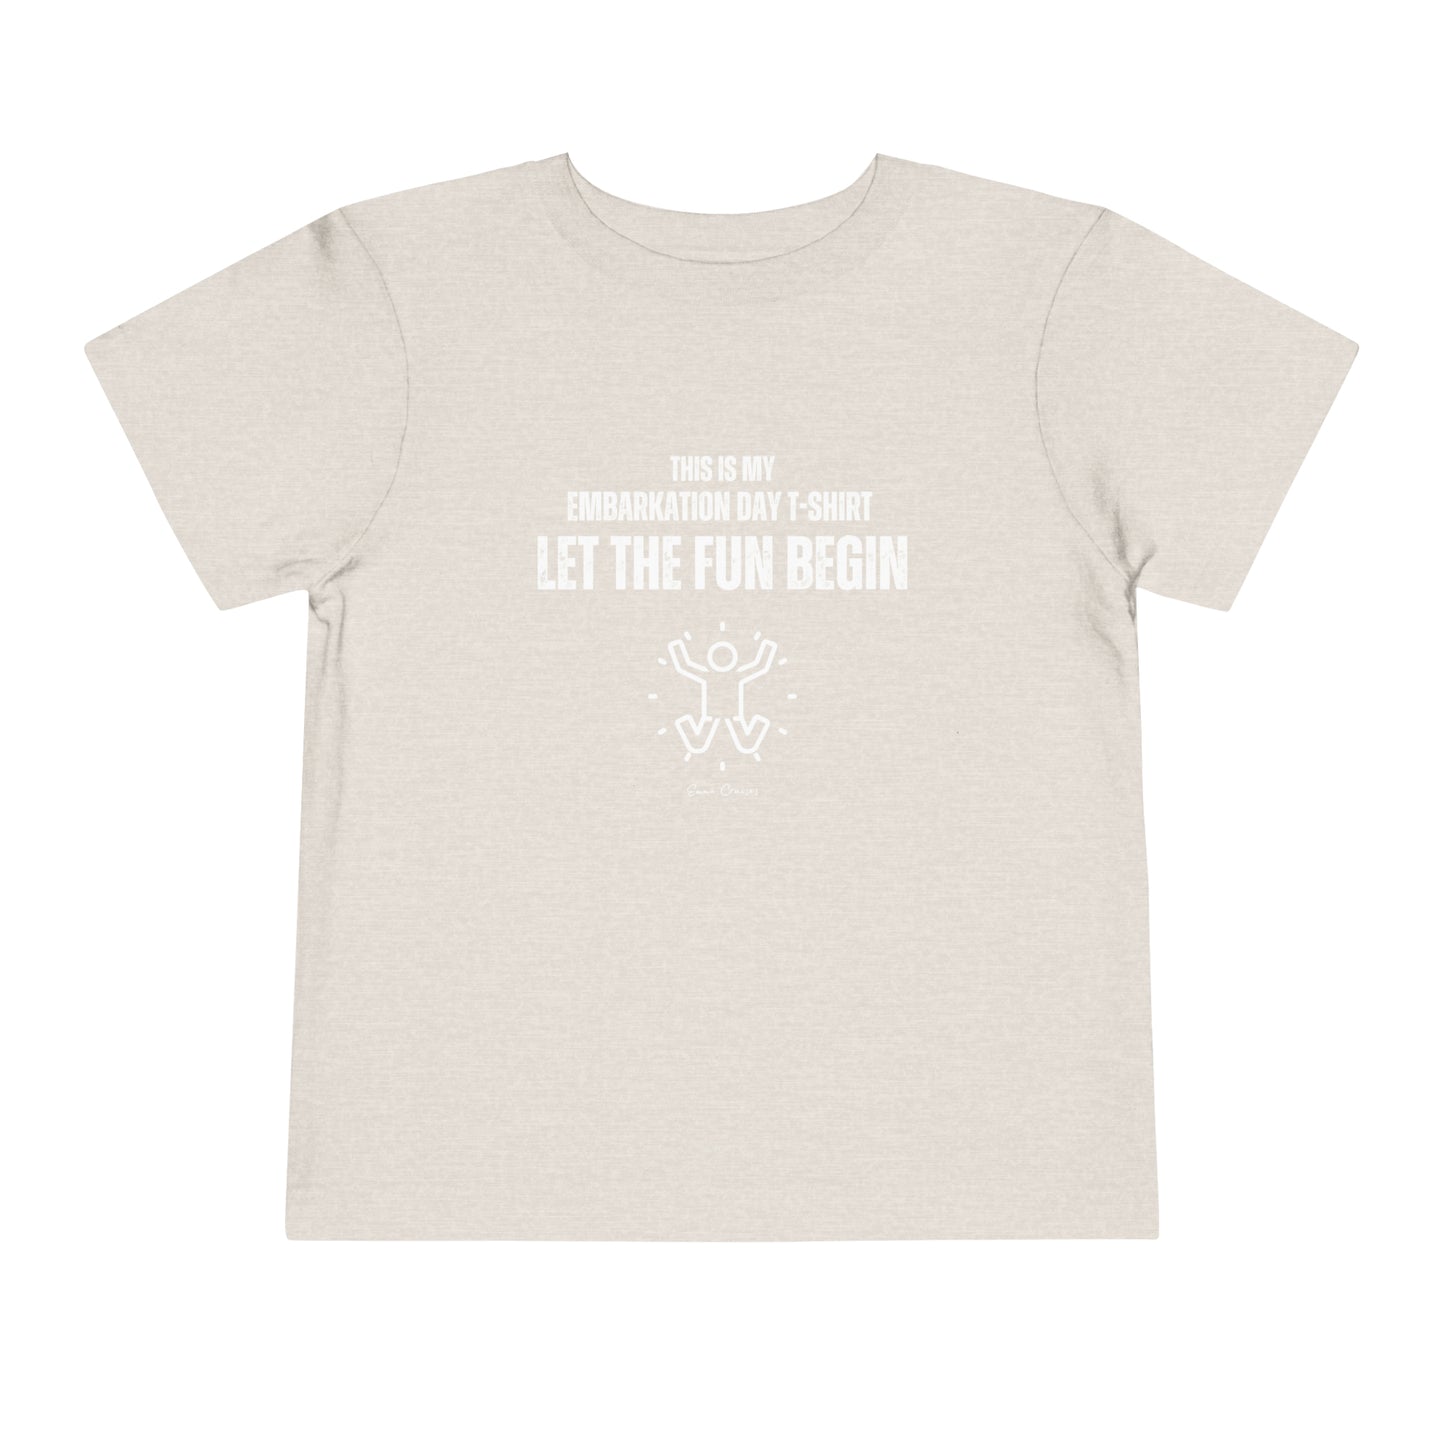 This is My Embarkation Day T-shirt - Toddler UNISEX T-Shirt